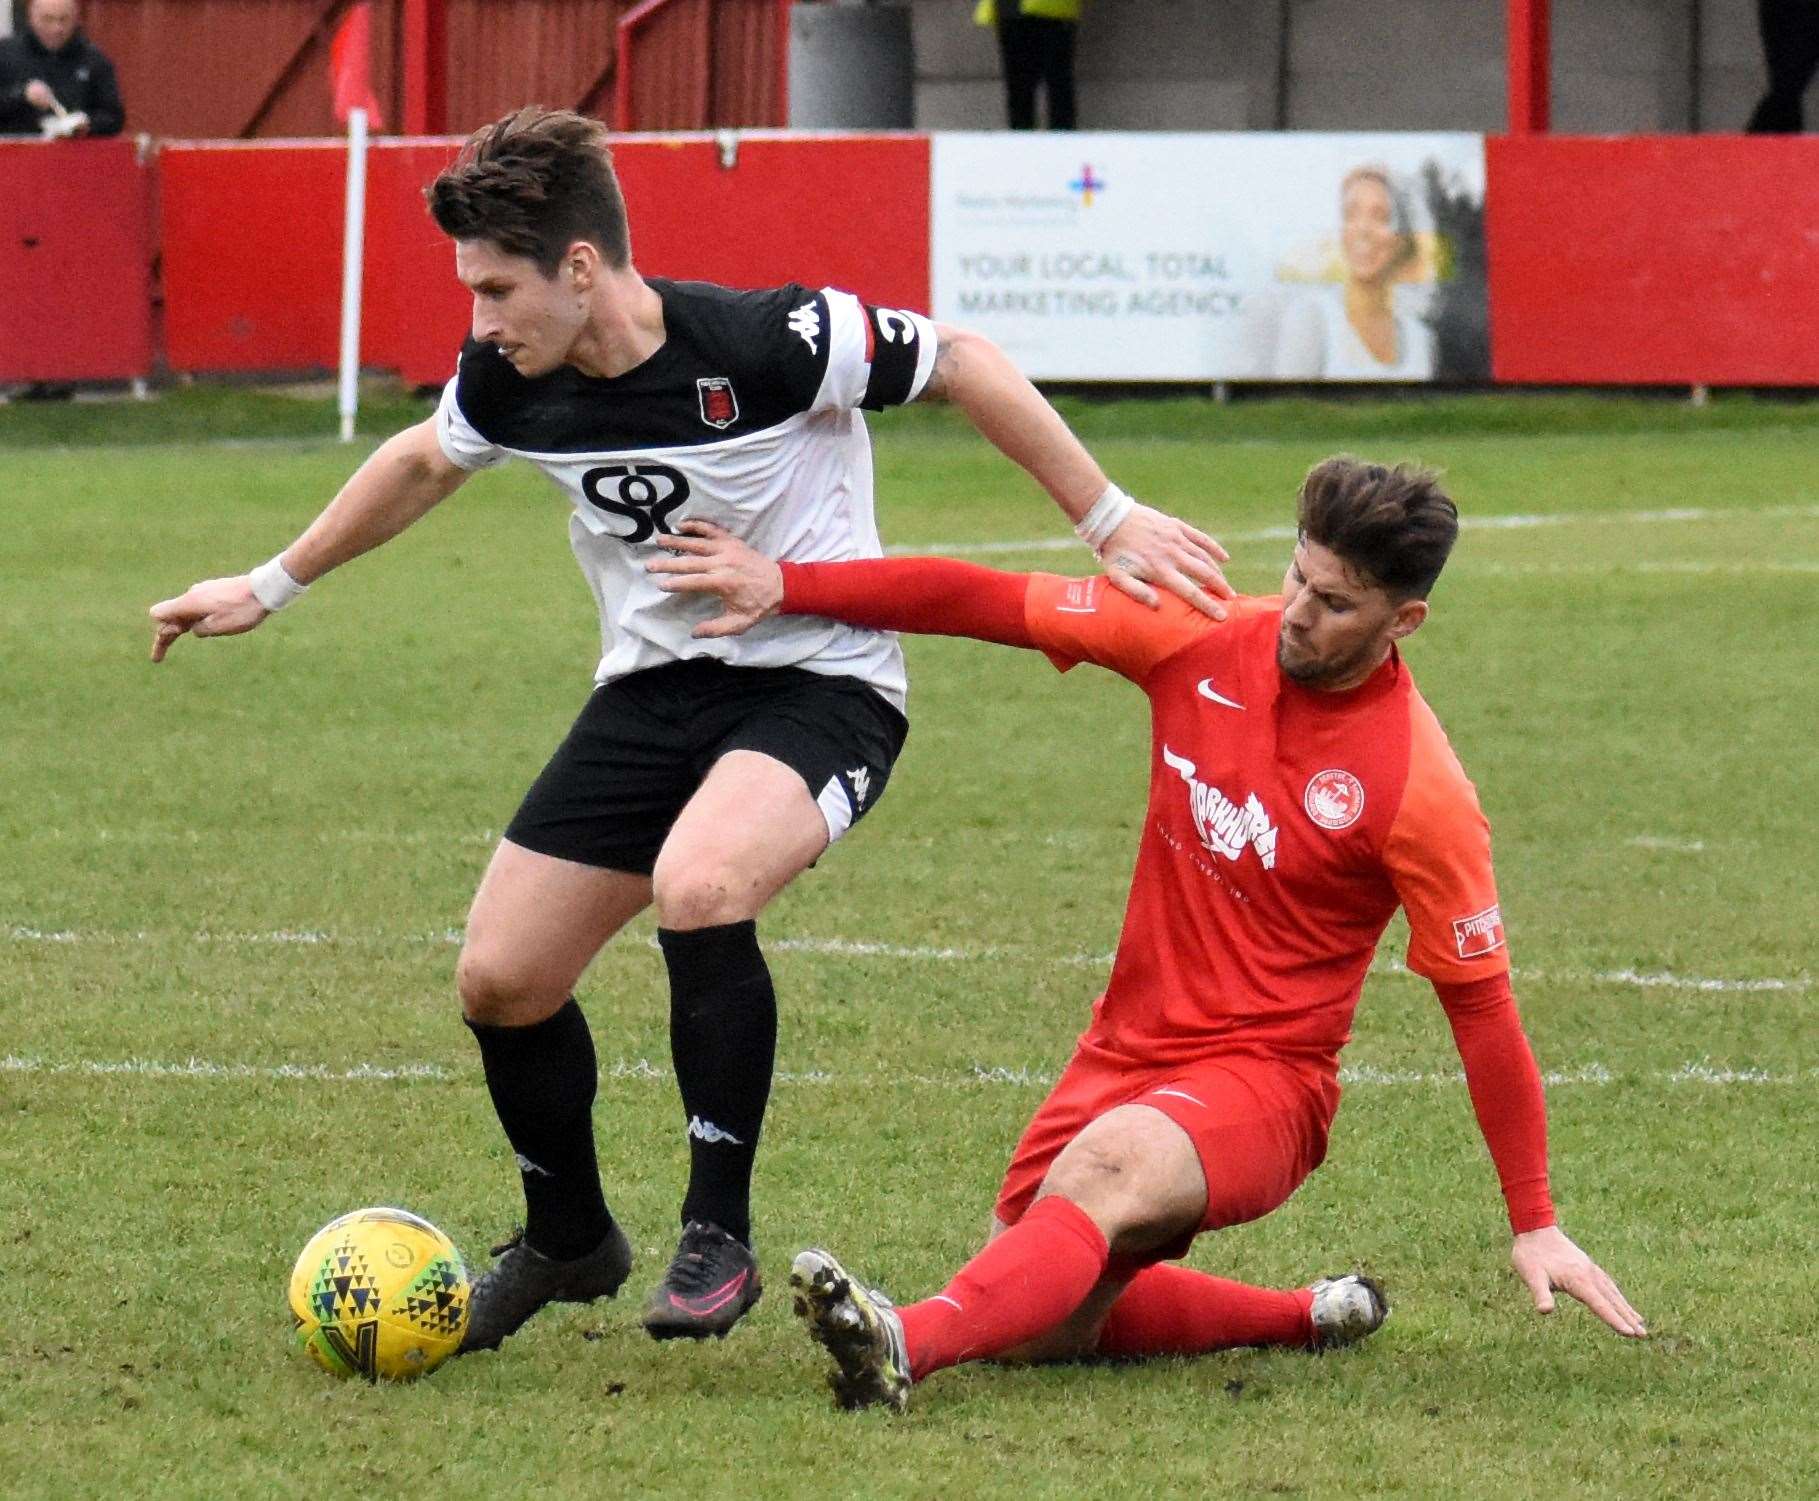 Faversham captain Harry Harding tries to evade the challenge of Hythe player-coach James Rogers during Town's 2-1 defeat at Reachfields. Picture: Randolph File